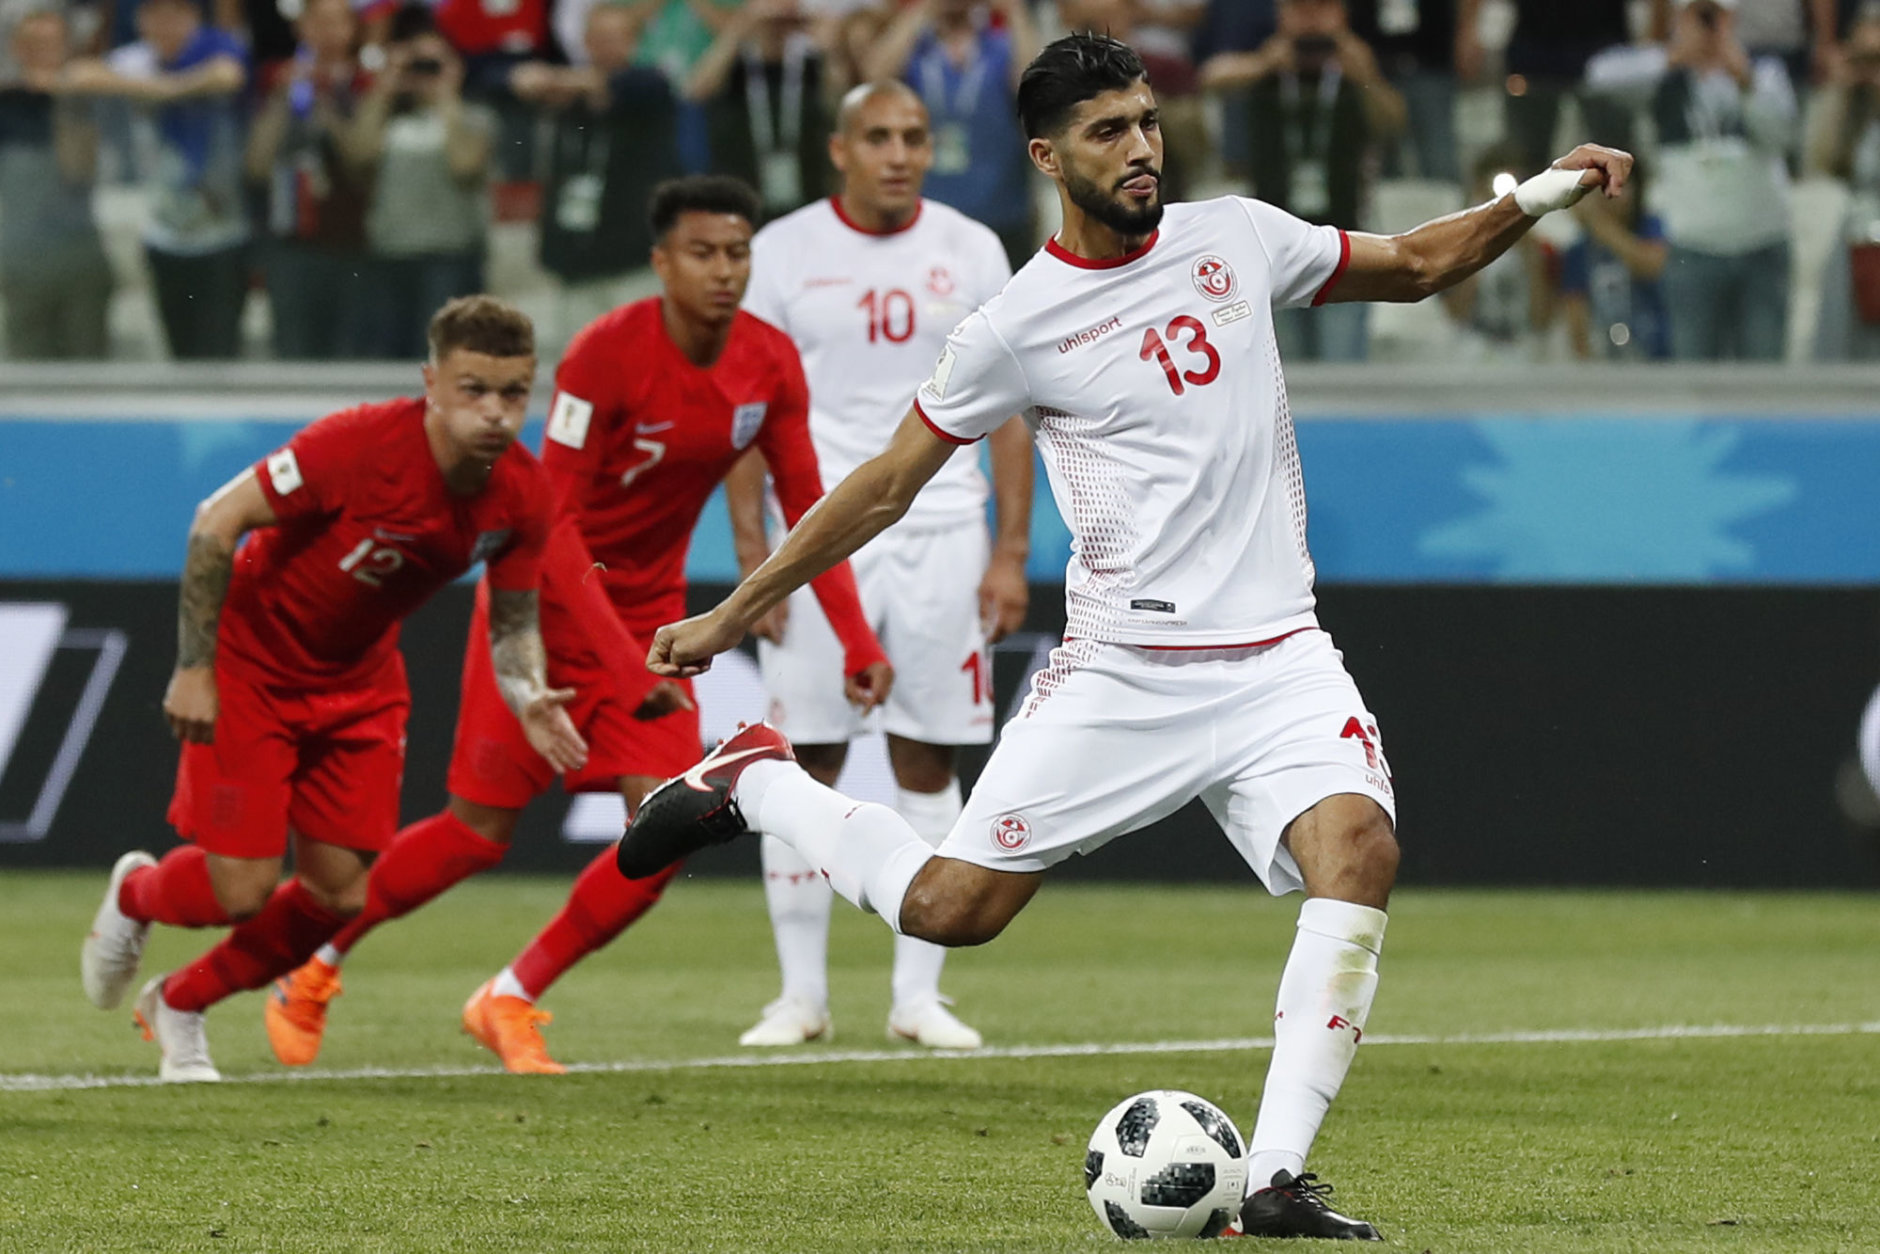 Tunisia's Ferjani Sassi scores from the penalty spot during the group G match against England at the 2018 soccer World Cup in the Volgograd Arena in Volgograd, Russia, Monday, June 18, 2018. (AP Photo/Alastair Grant)